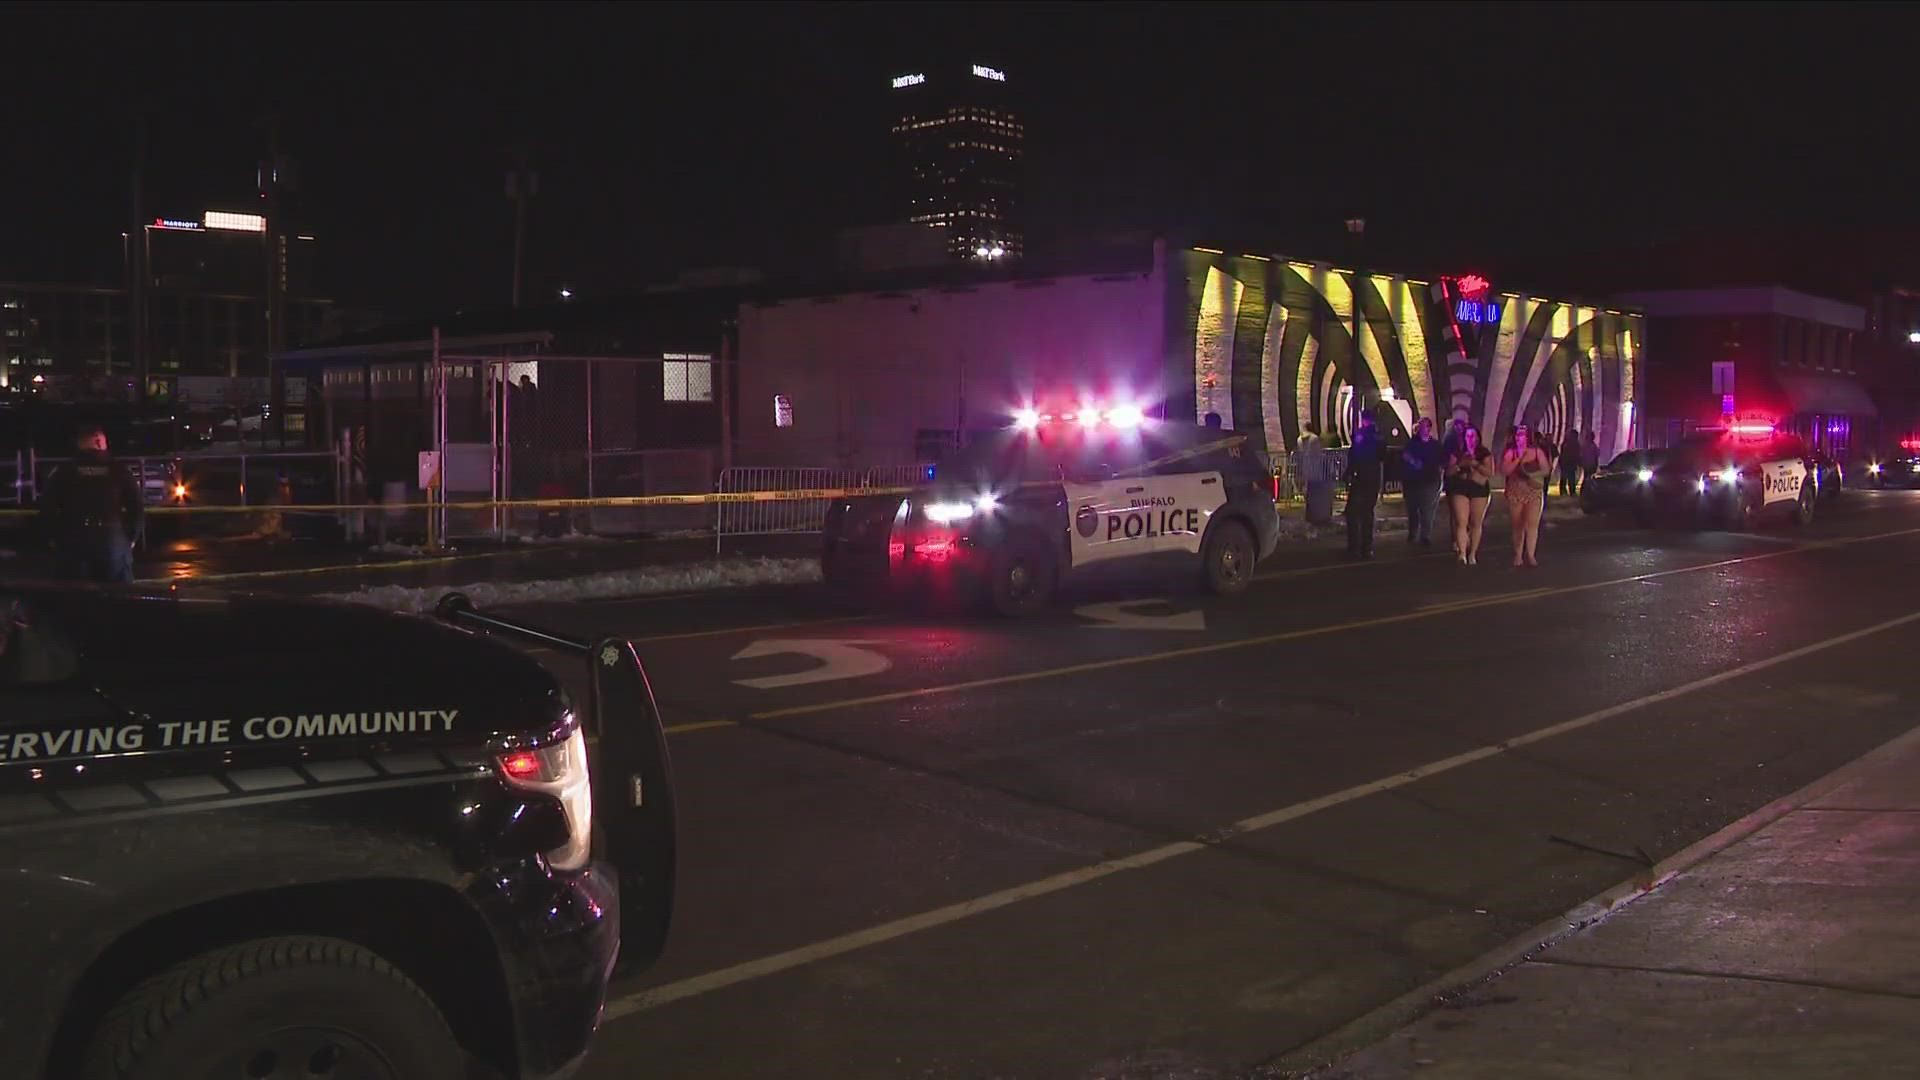 A security guard was shot in the Club Marcella parking lot early Sunday morning. At last check, the 36-year-old was listed in stable condition.